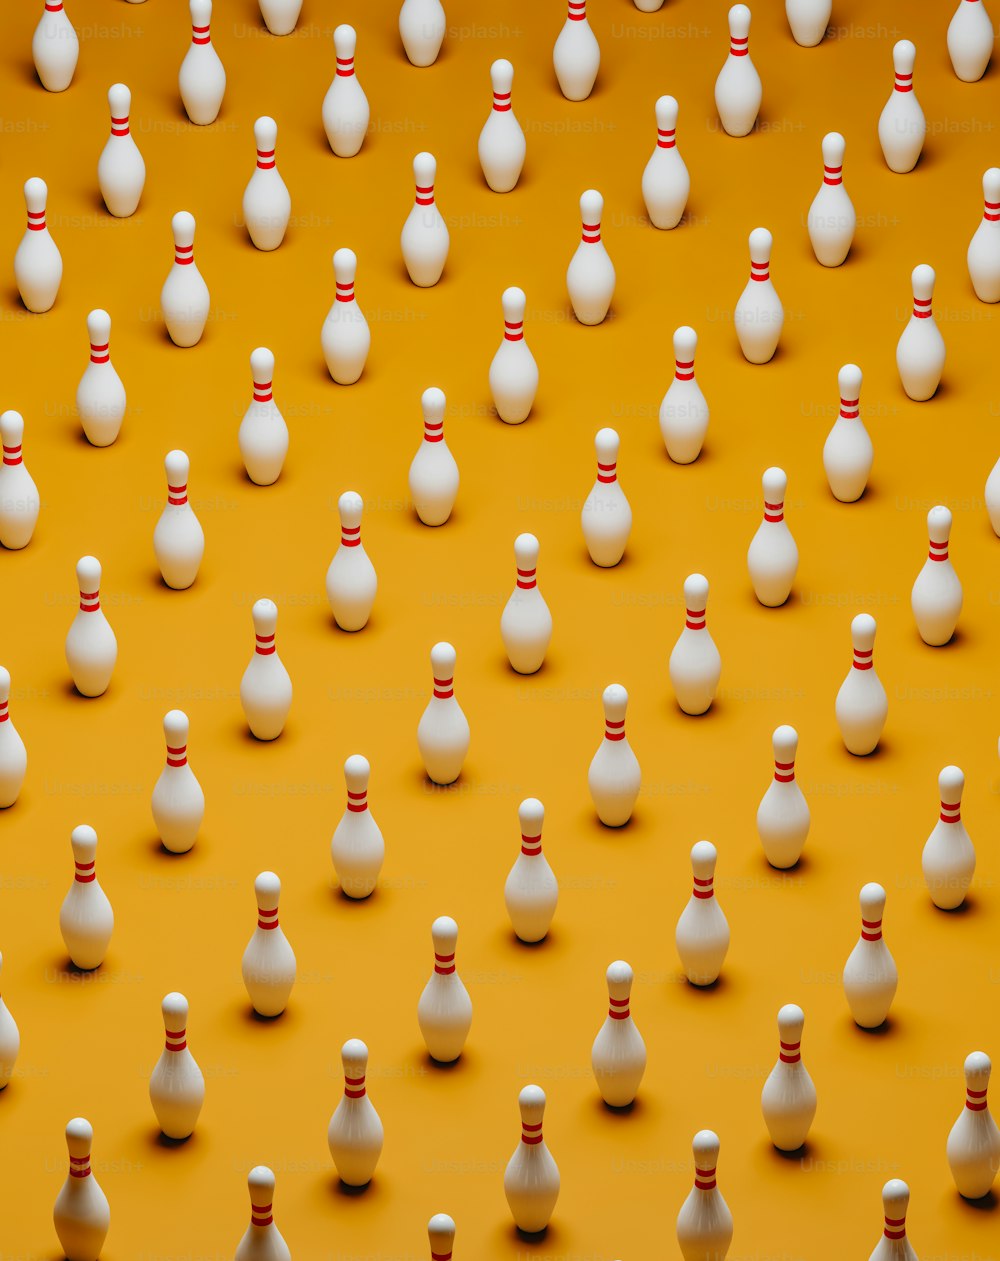 a large group of white bowling pins on a yellow background